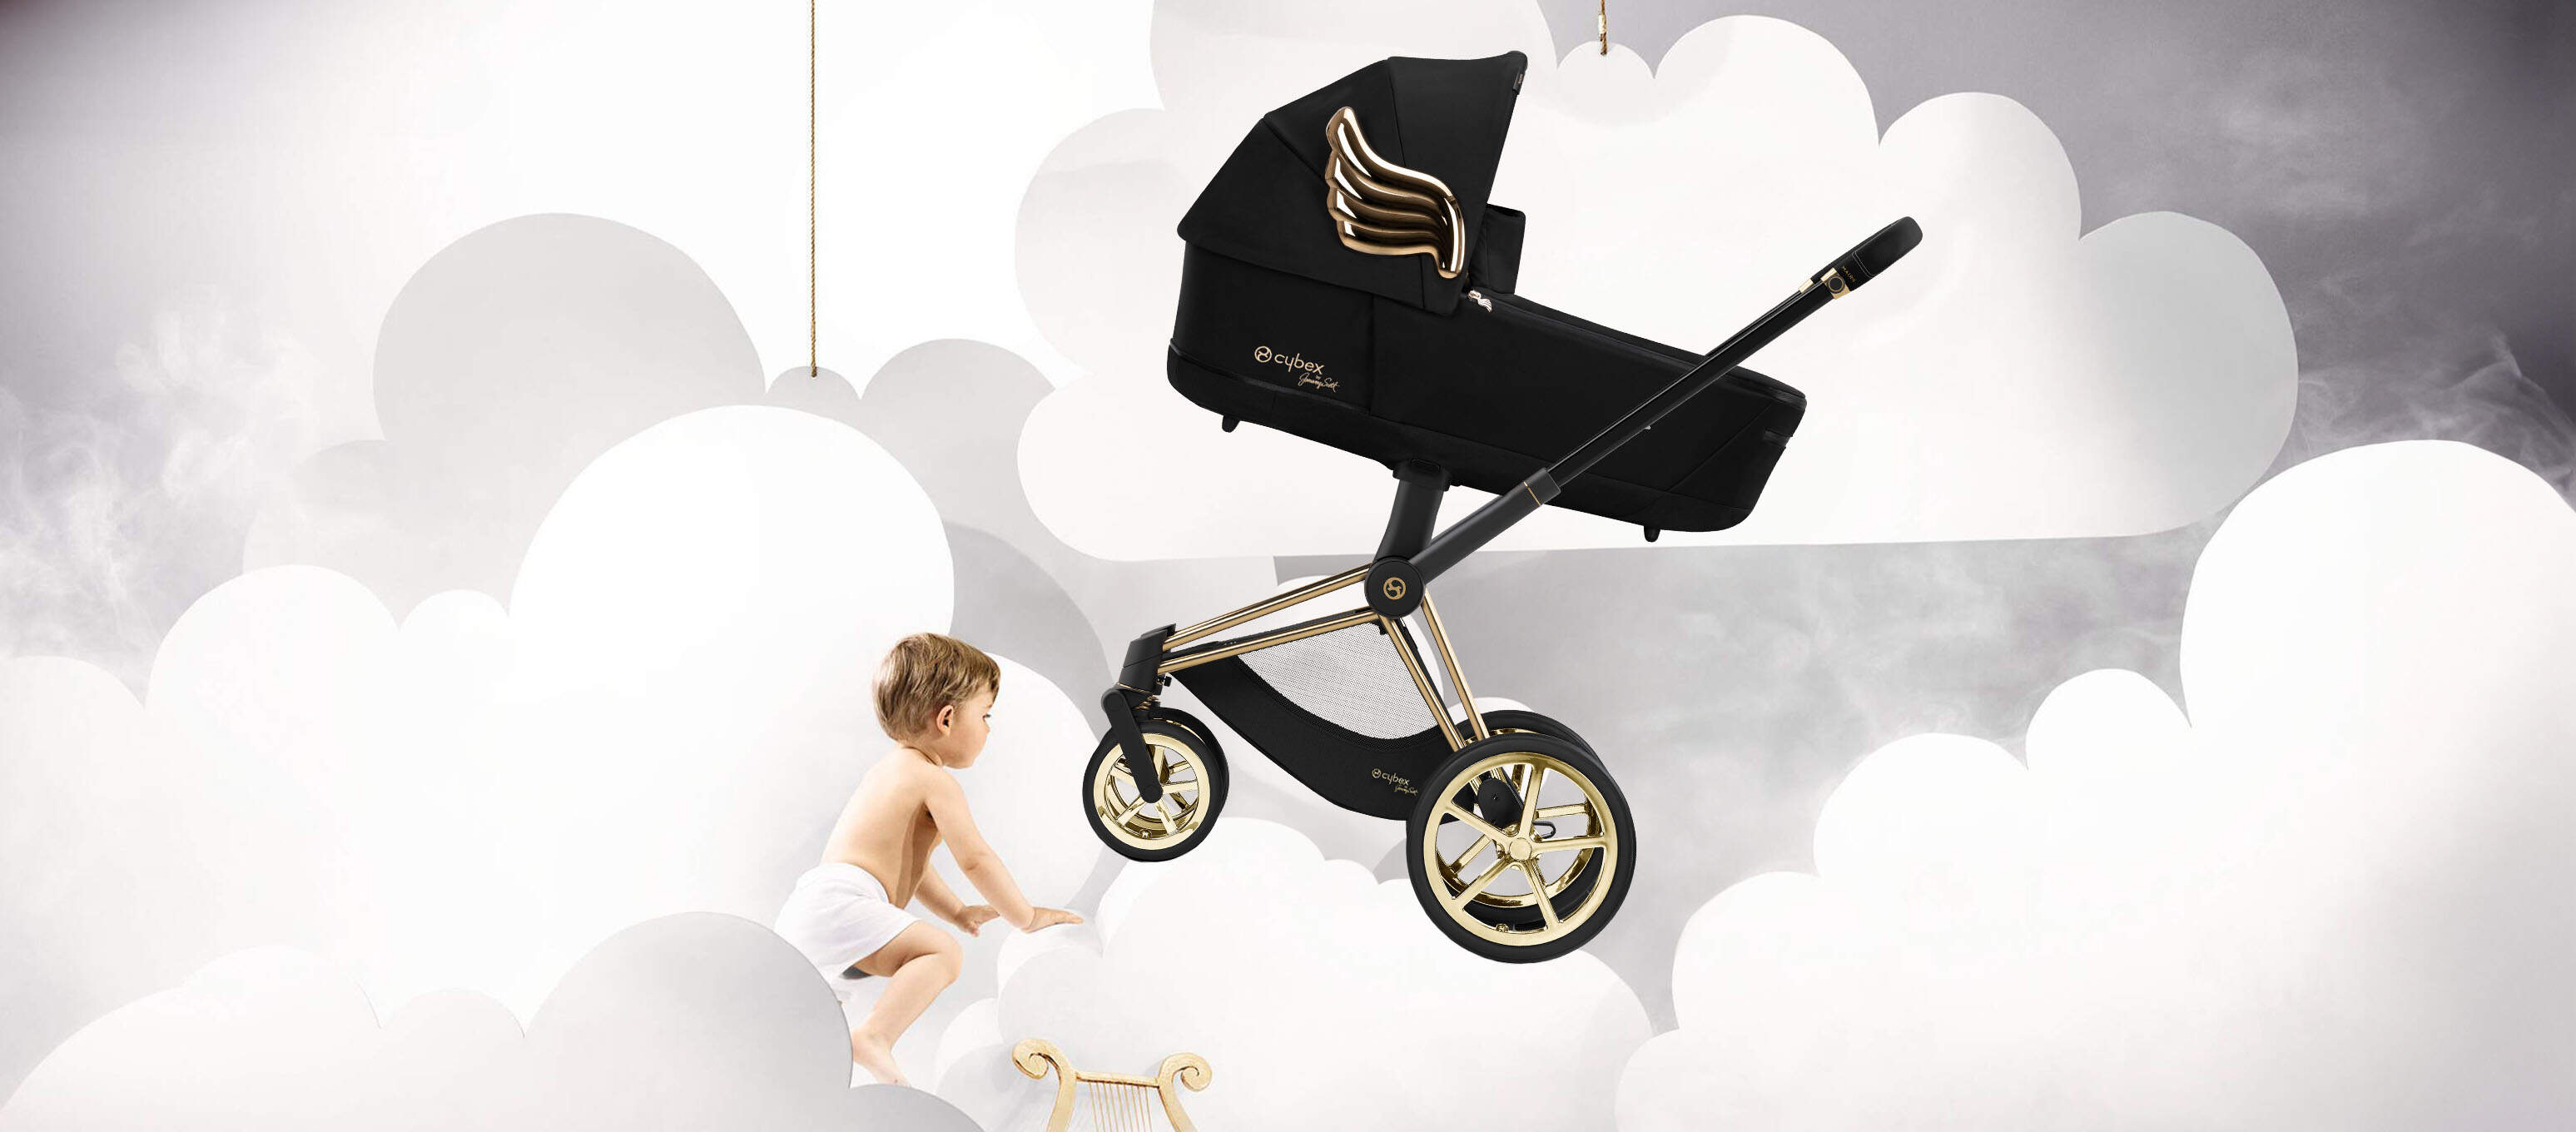 Cybex by Jeremy Scott Wings Collection Stroller and Baby Image